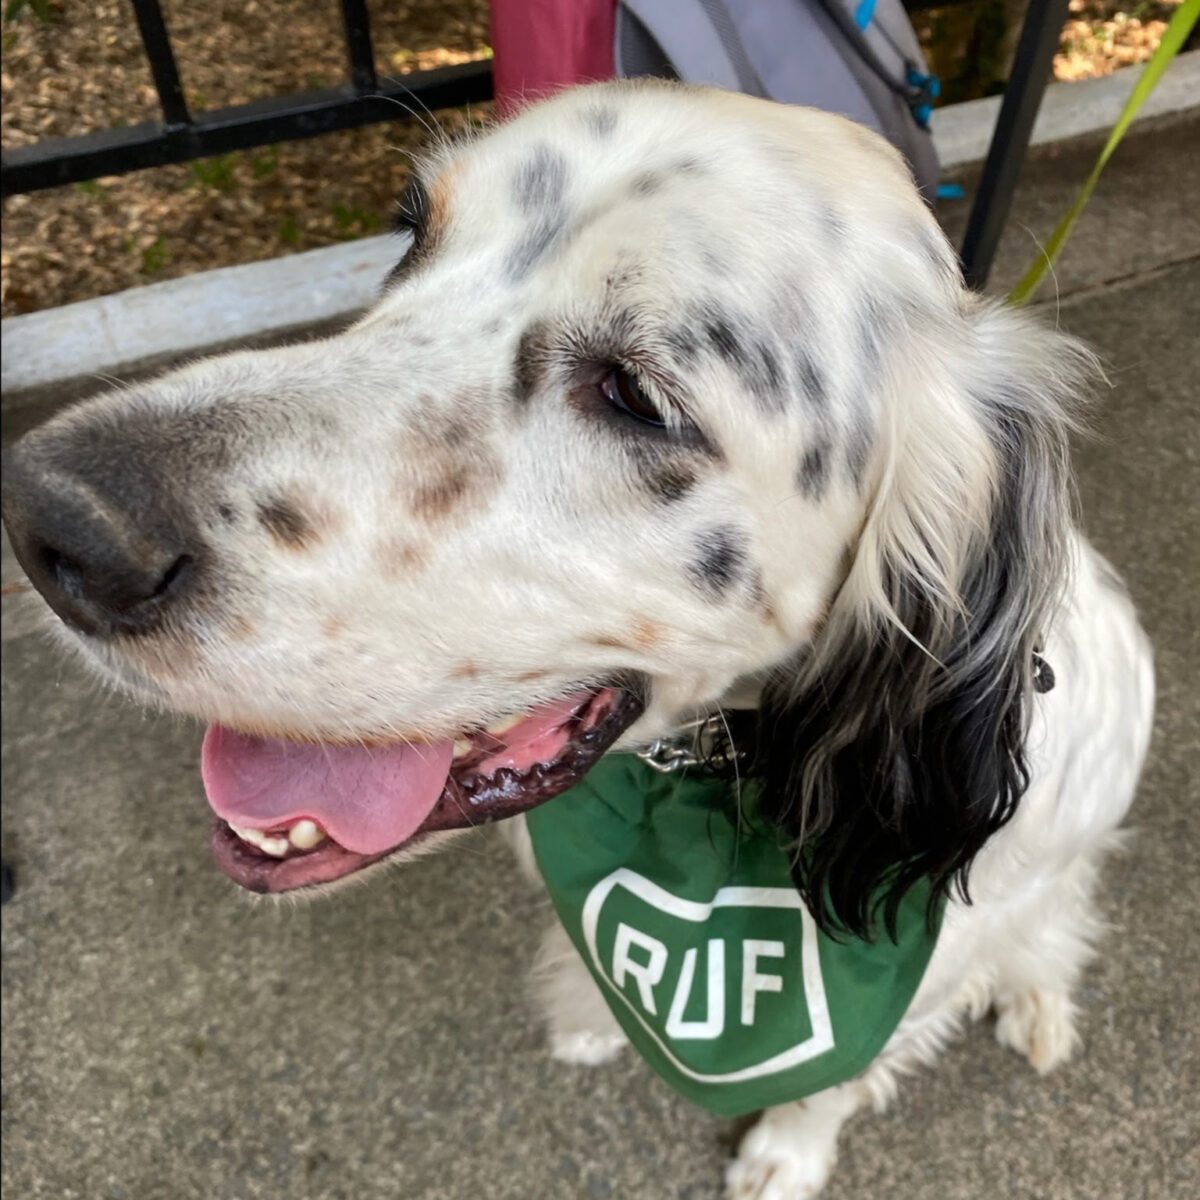 Camp the dog is a good boy and a great RUF recruiter! 